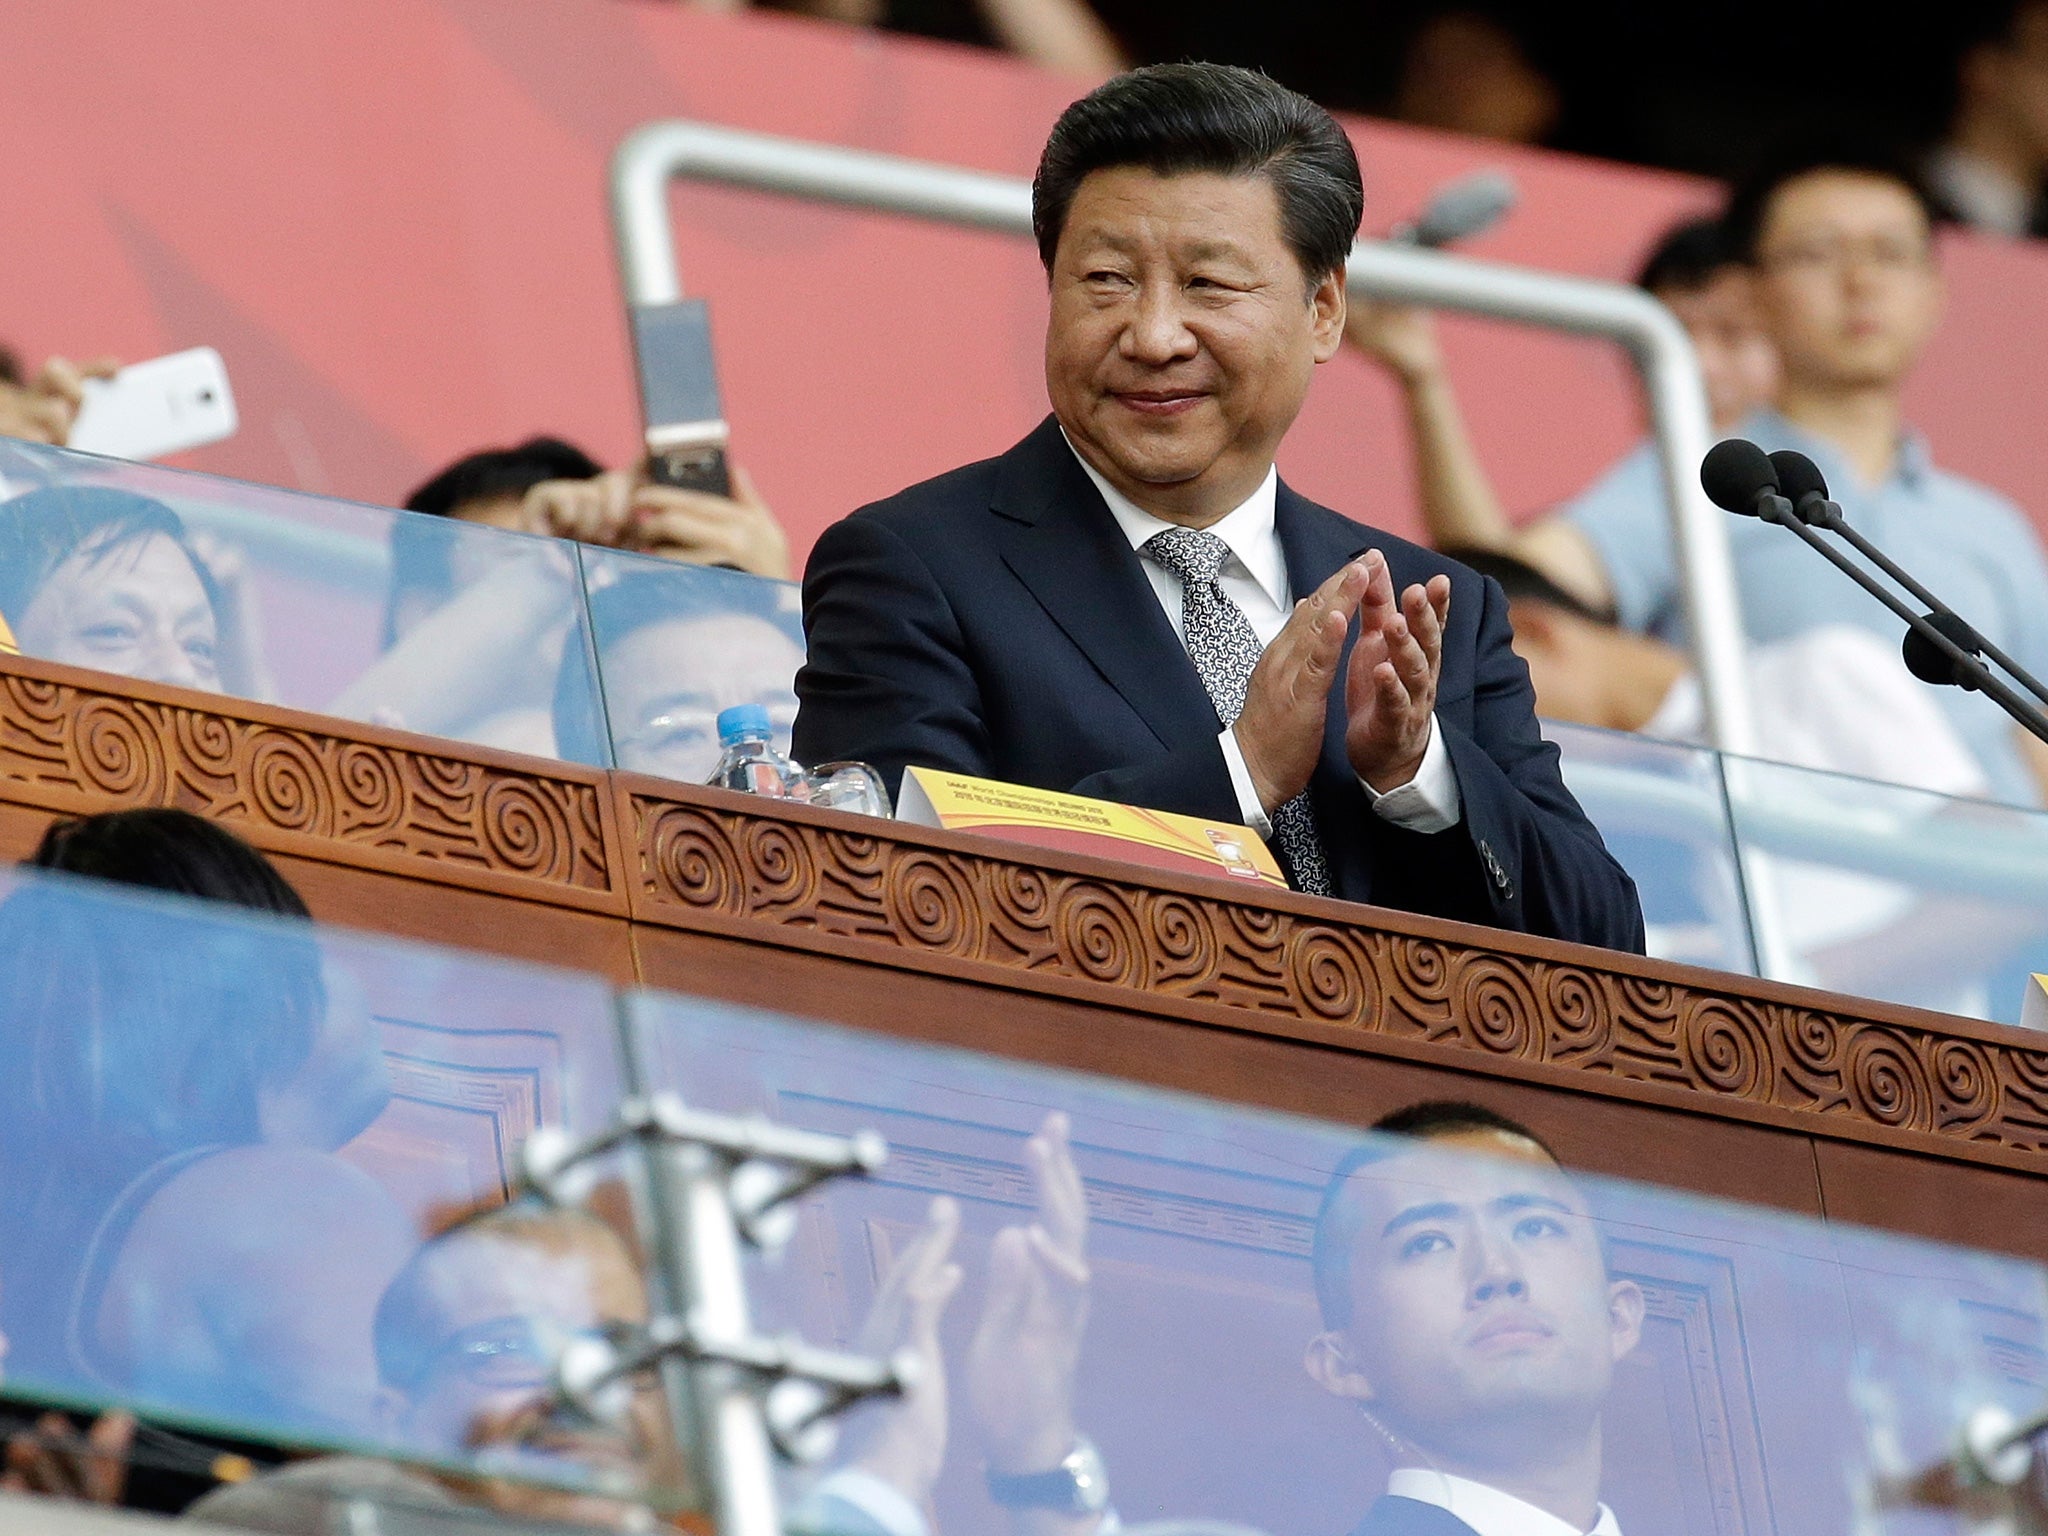 Chinese President Xi Jinping attends the opening ceremony of the World Athletics Championships at the Bird's Nest stadium in Beijing